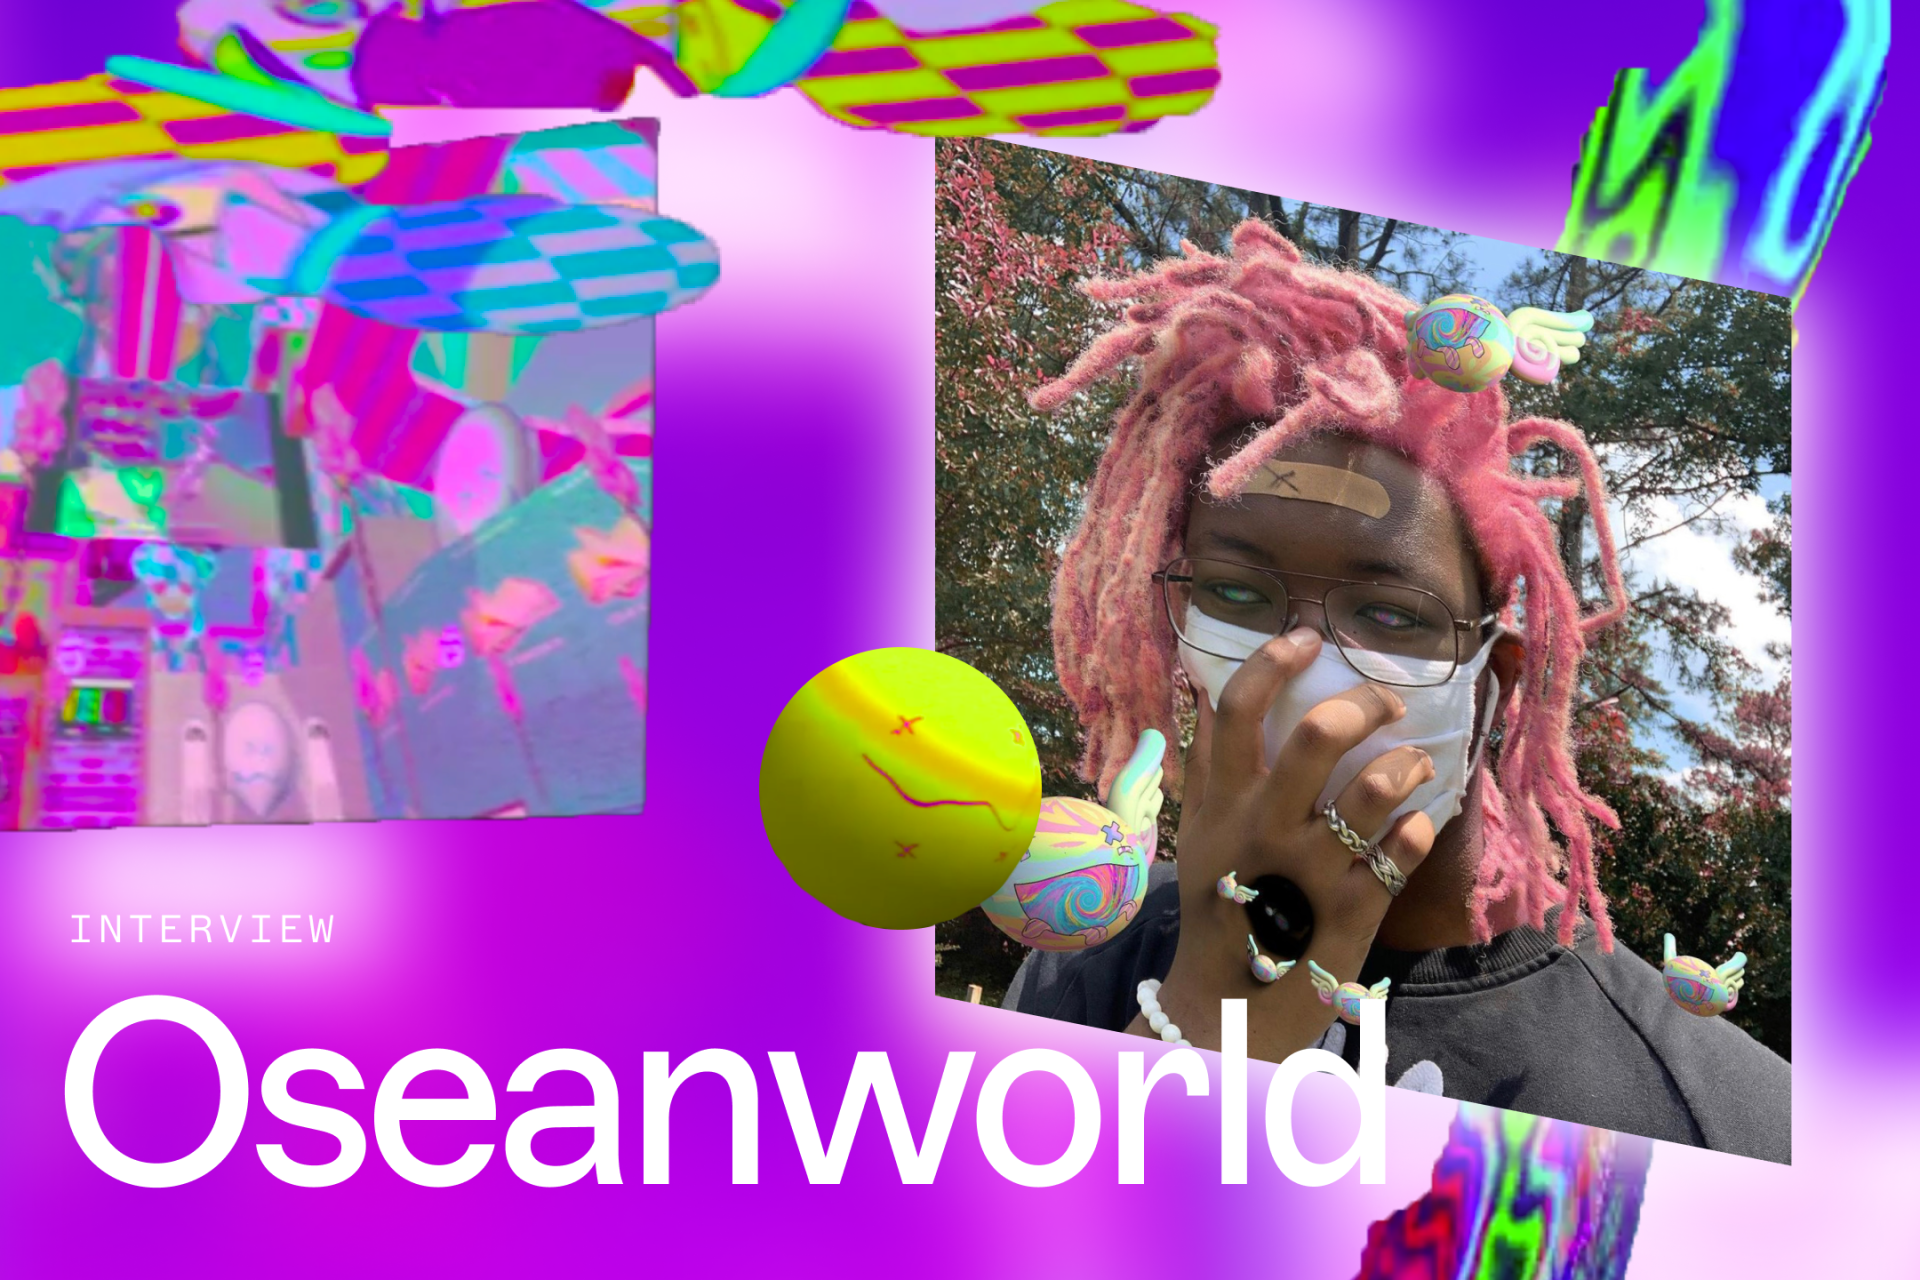 Oseanworld dives into 3D.